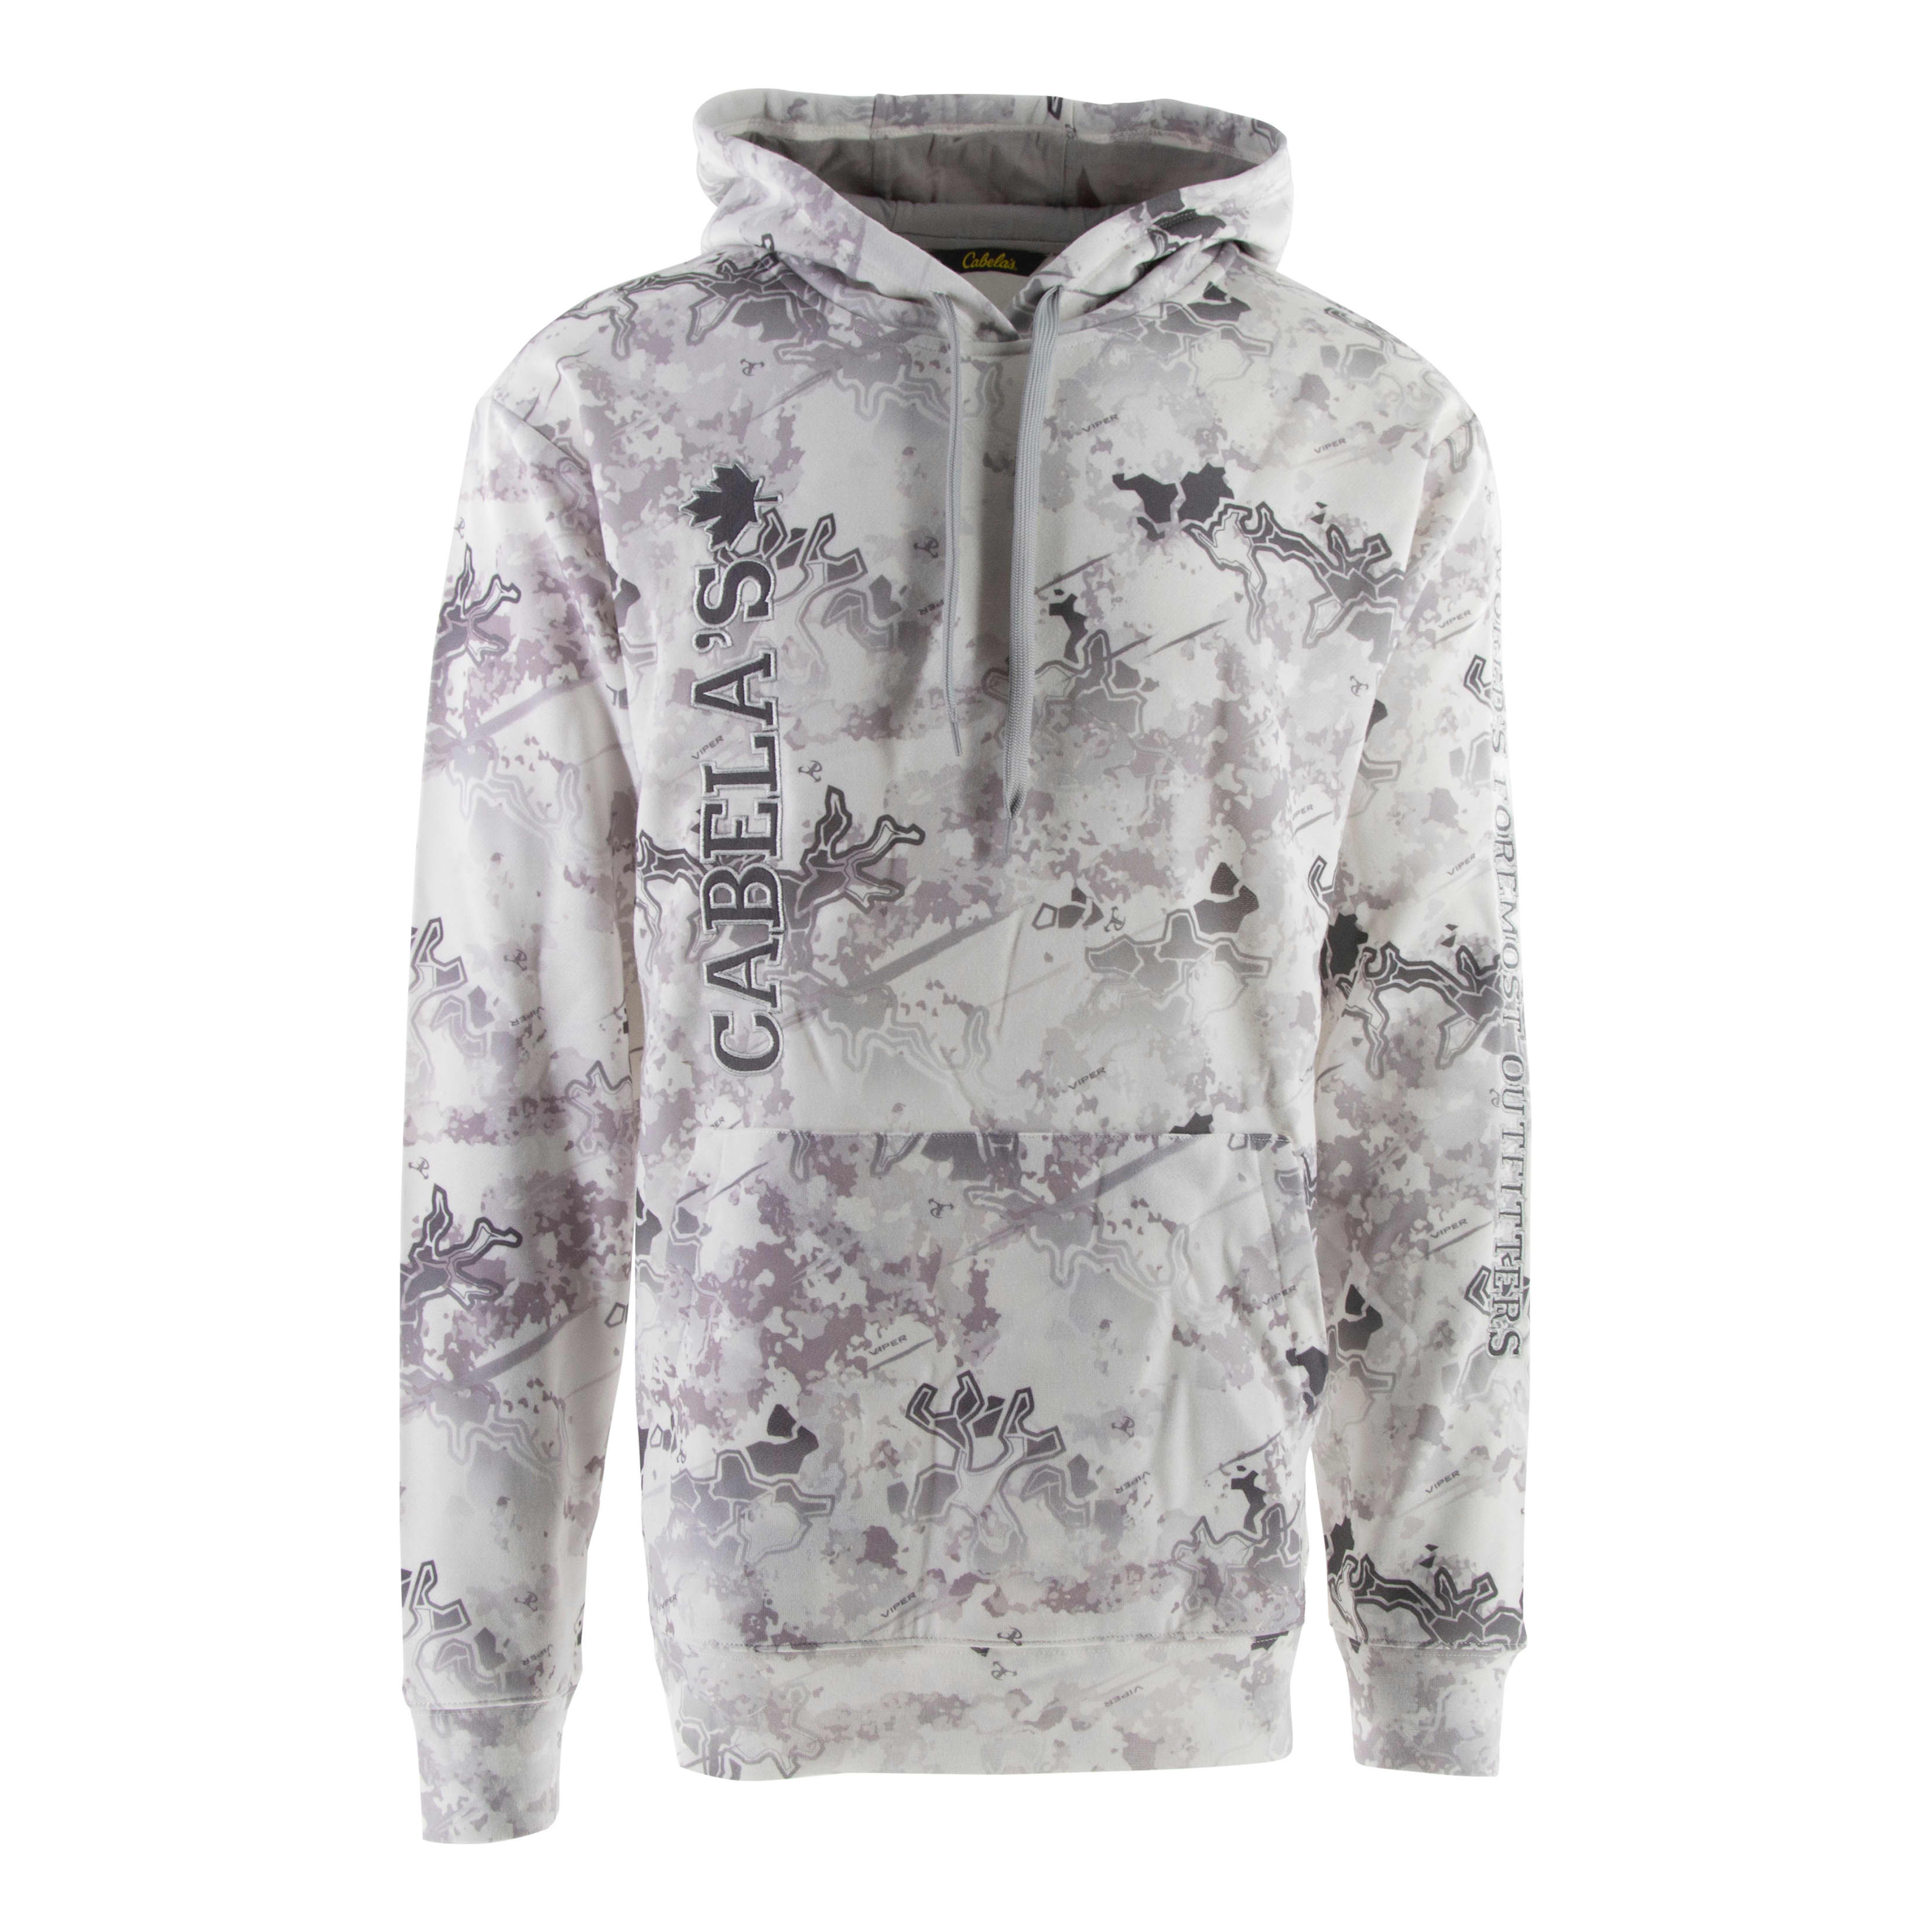 Cabela’s Canada Men’s Opening Day Hoodie IV - Viper Snow